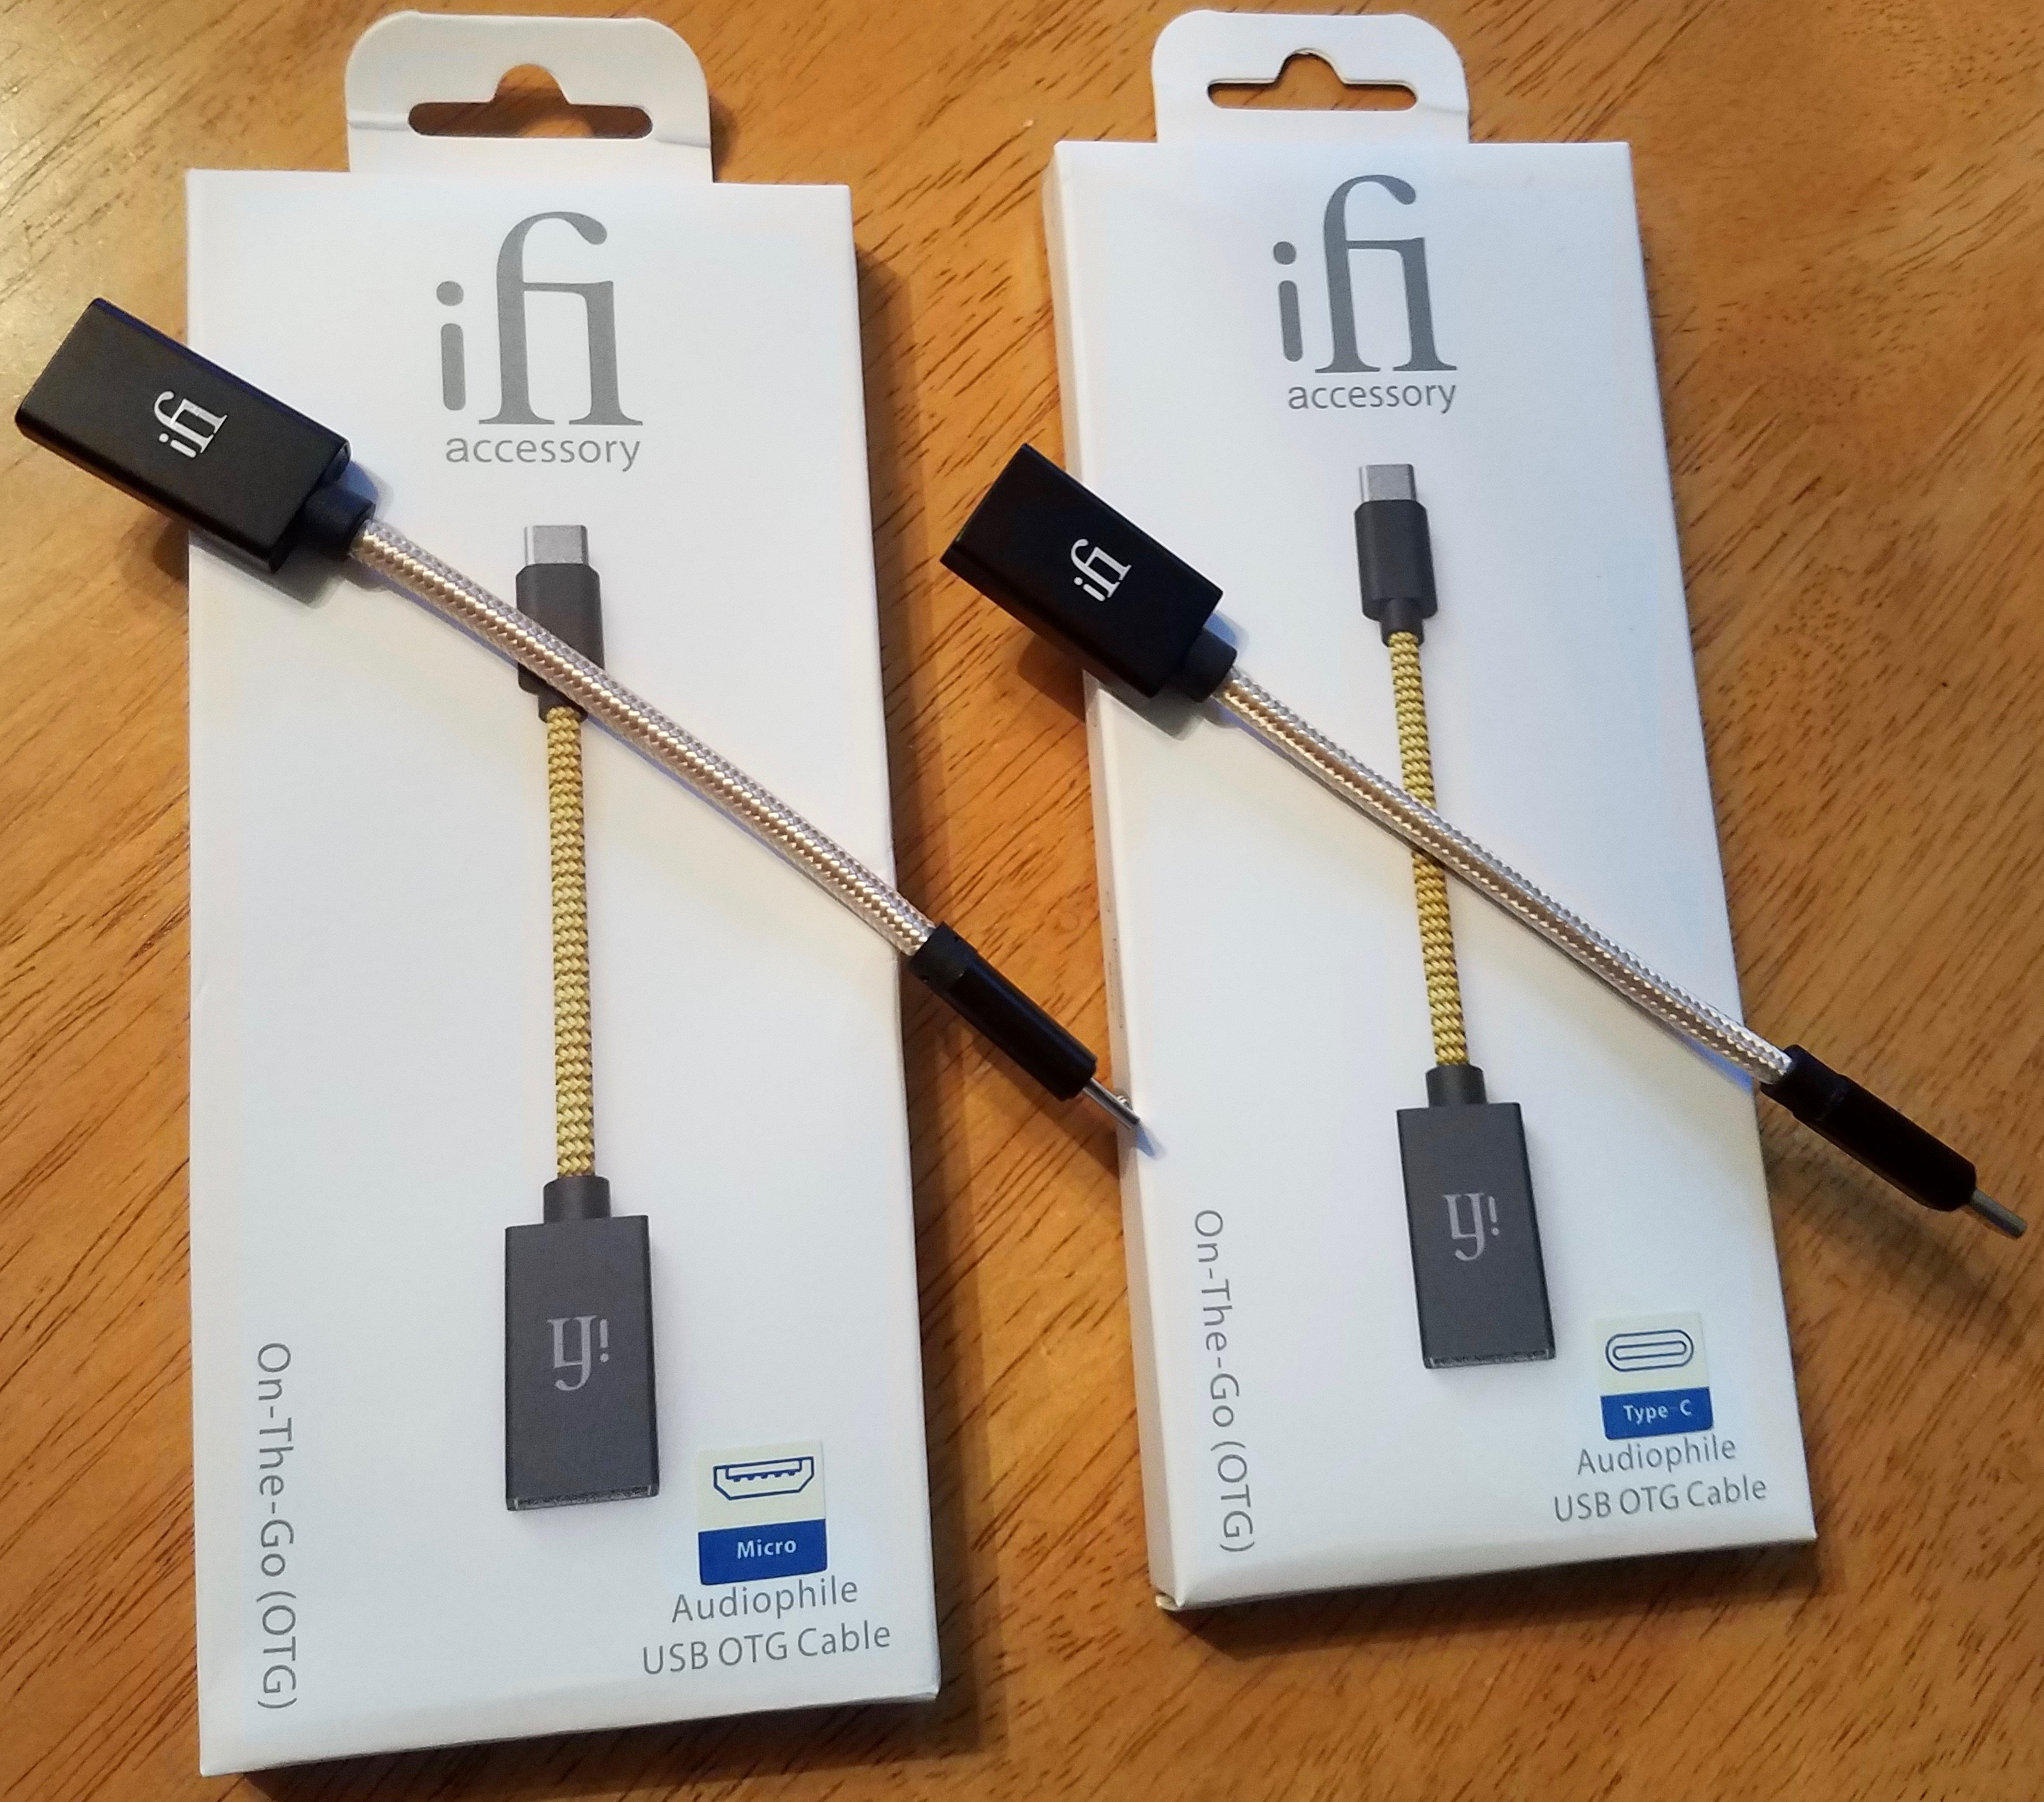 iFi-AUDIO OTG On-The-Go Cable audiophiles USB Kabel mit Micro-Anschluss Android